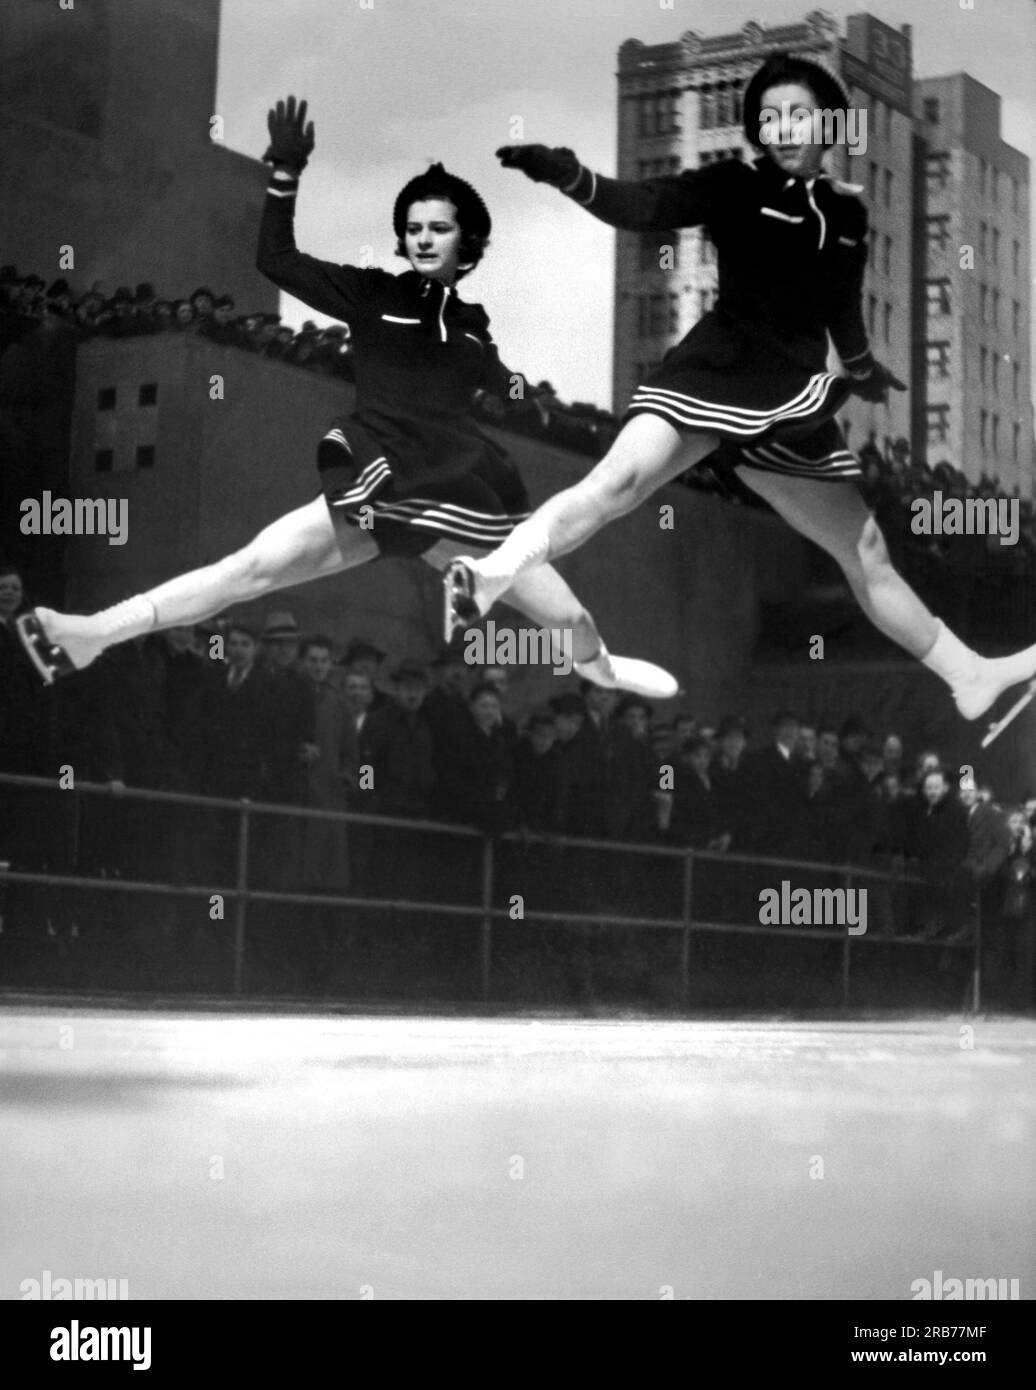 New York, New York:  1940. Two ice skaters perform on the ice at Rockefeller Center. Stock Photo